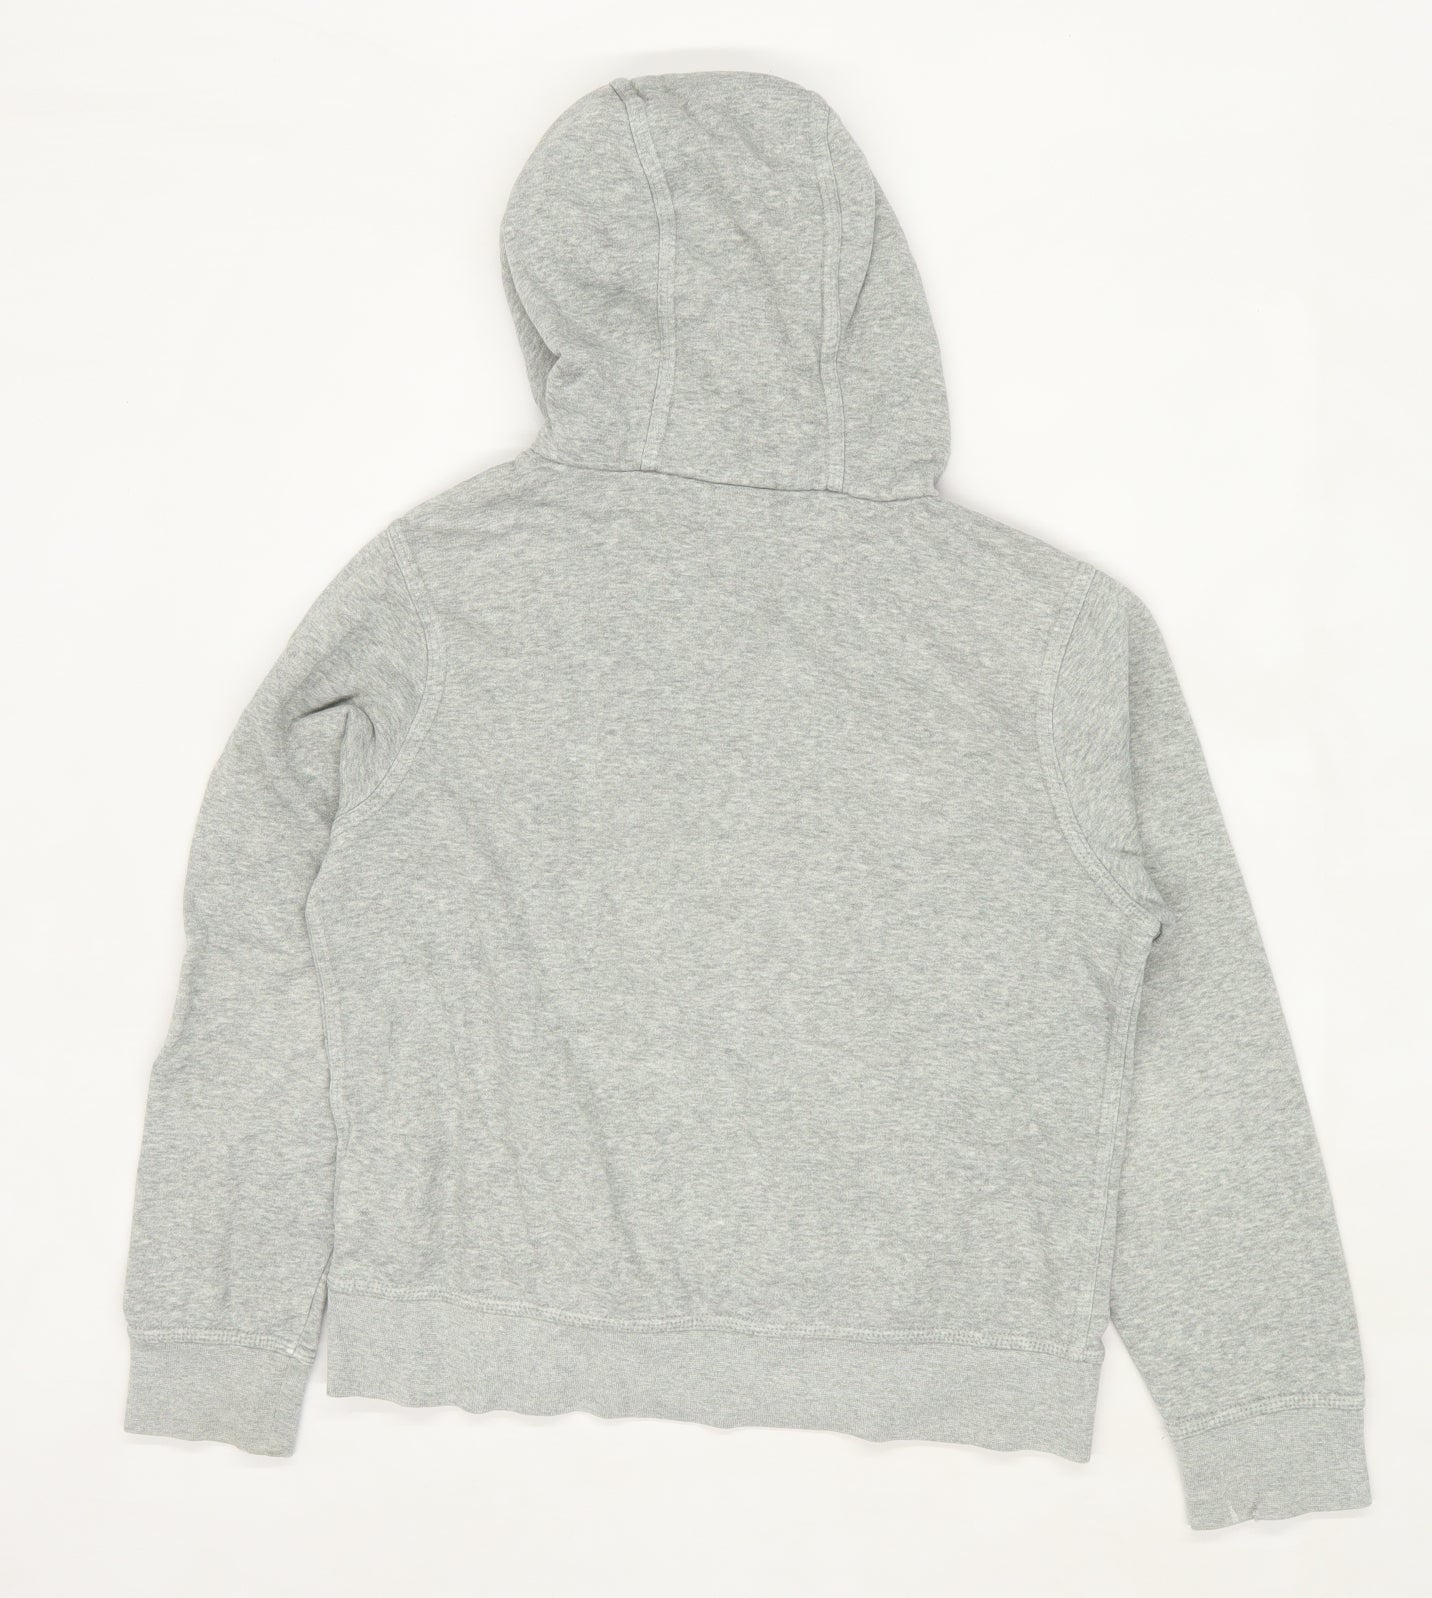 Nike Boys Graphic Grey Just Do It Slogan Hoodie Age 10-12 Years